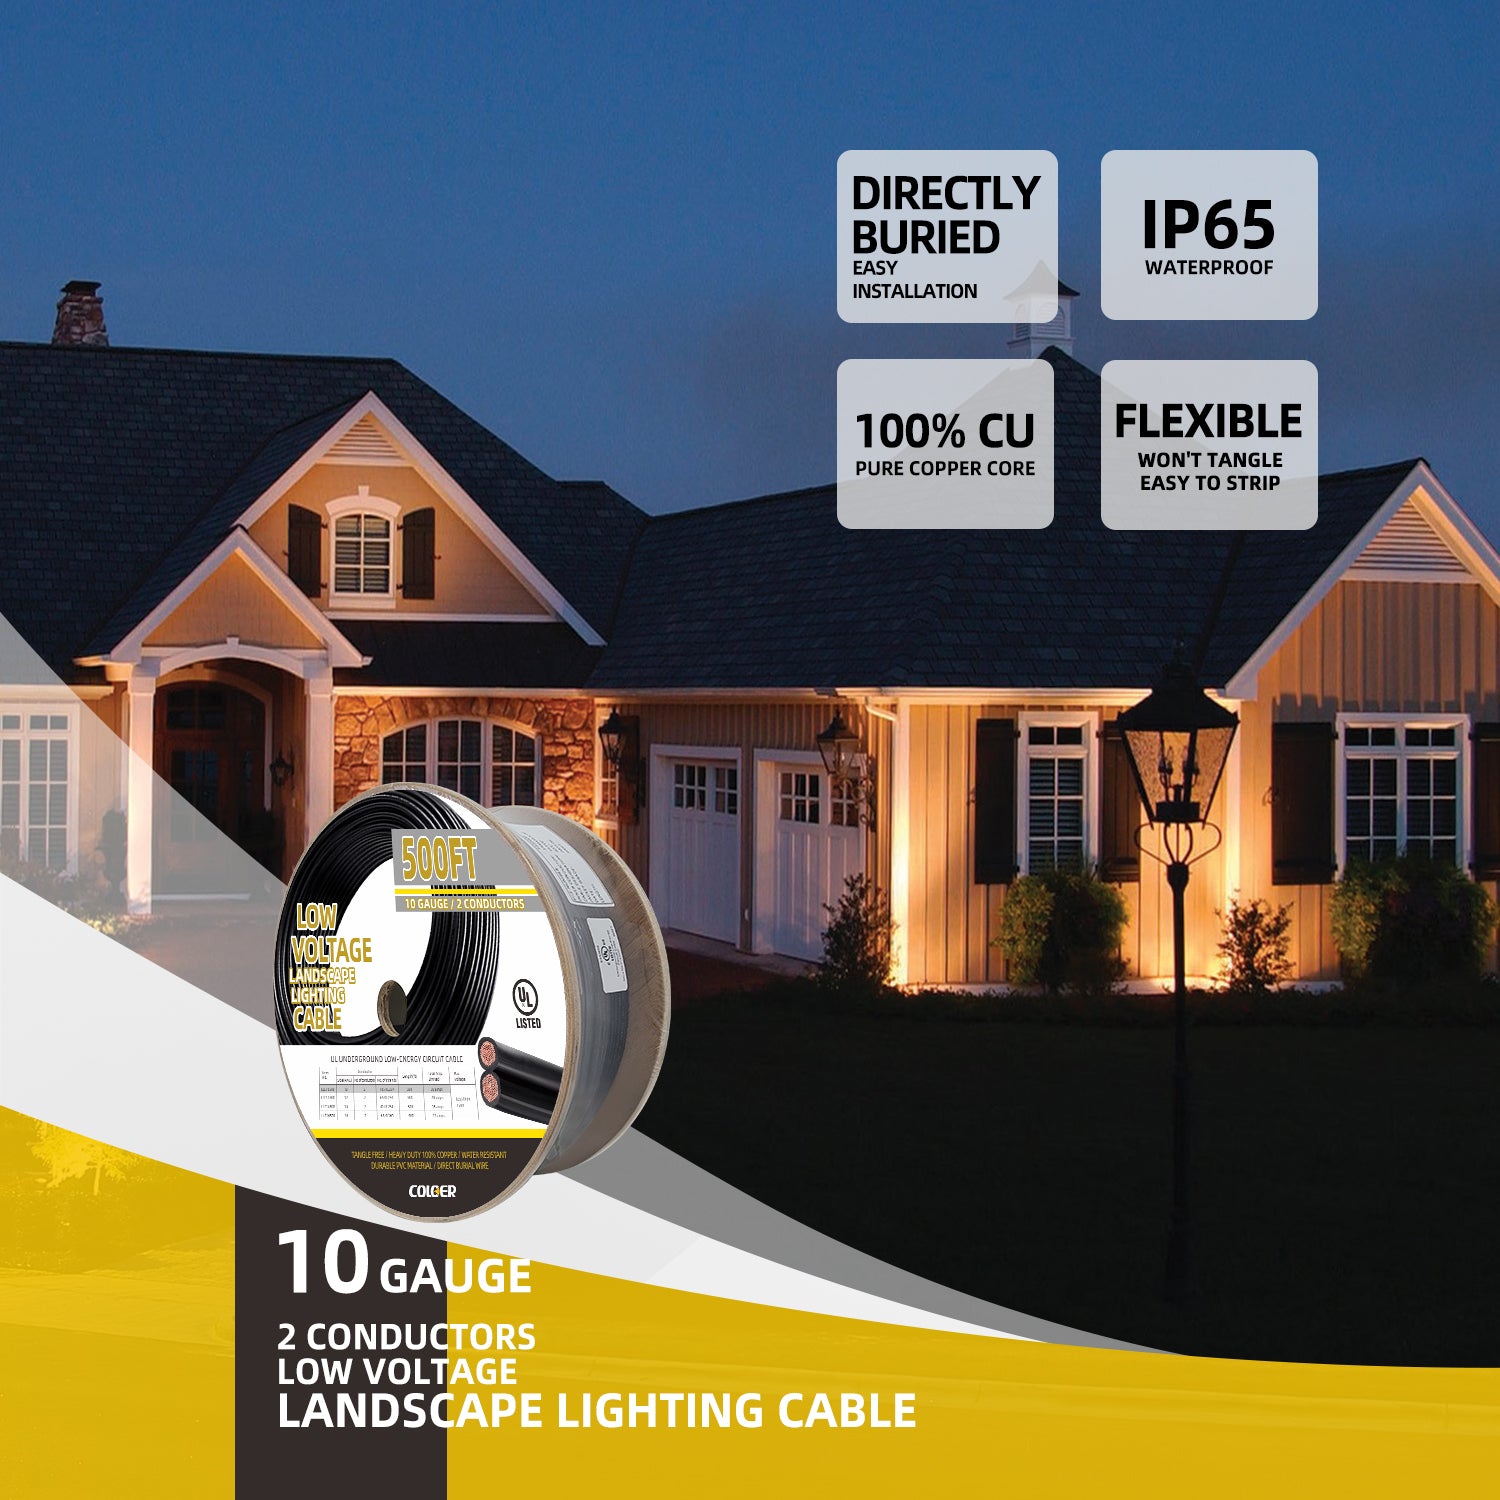 500ft spool of 10 gauge 2 conductor low voltage landscape lighting cable in front of an illuminated house. The cable is described as directly buried, IP65 waterproof, 100% pure copper core, and flexible.